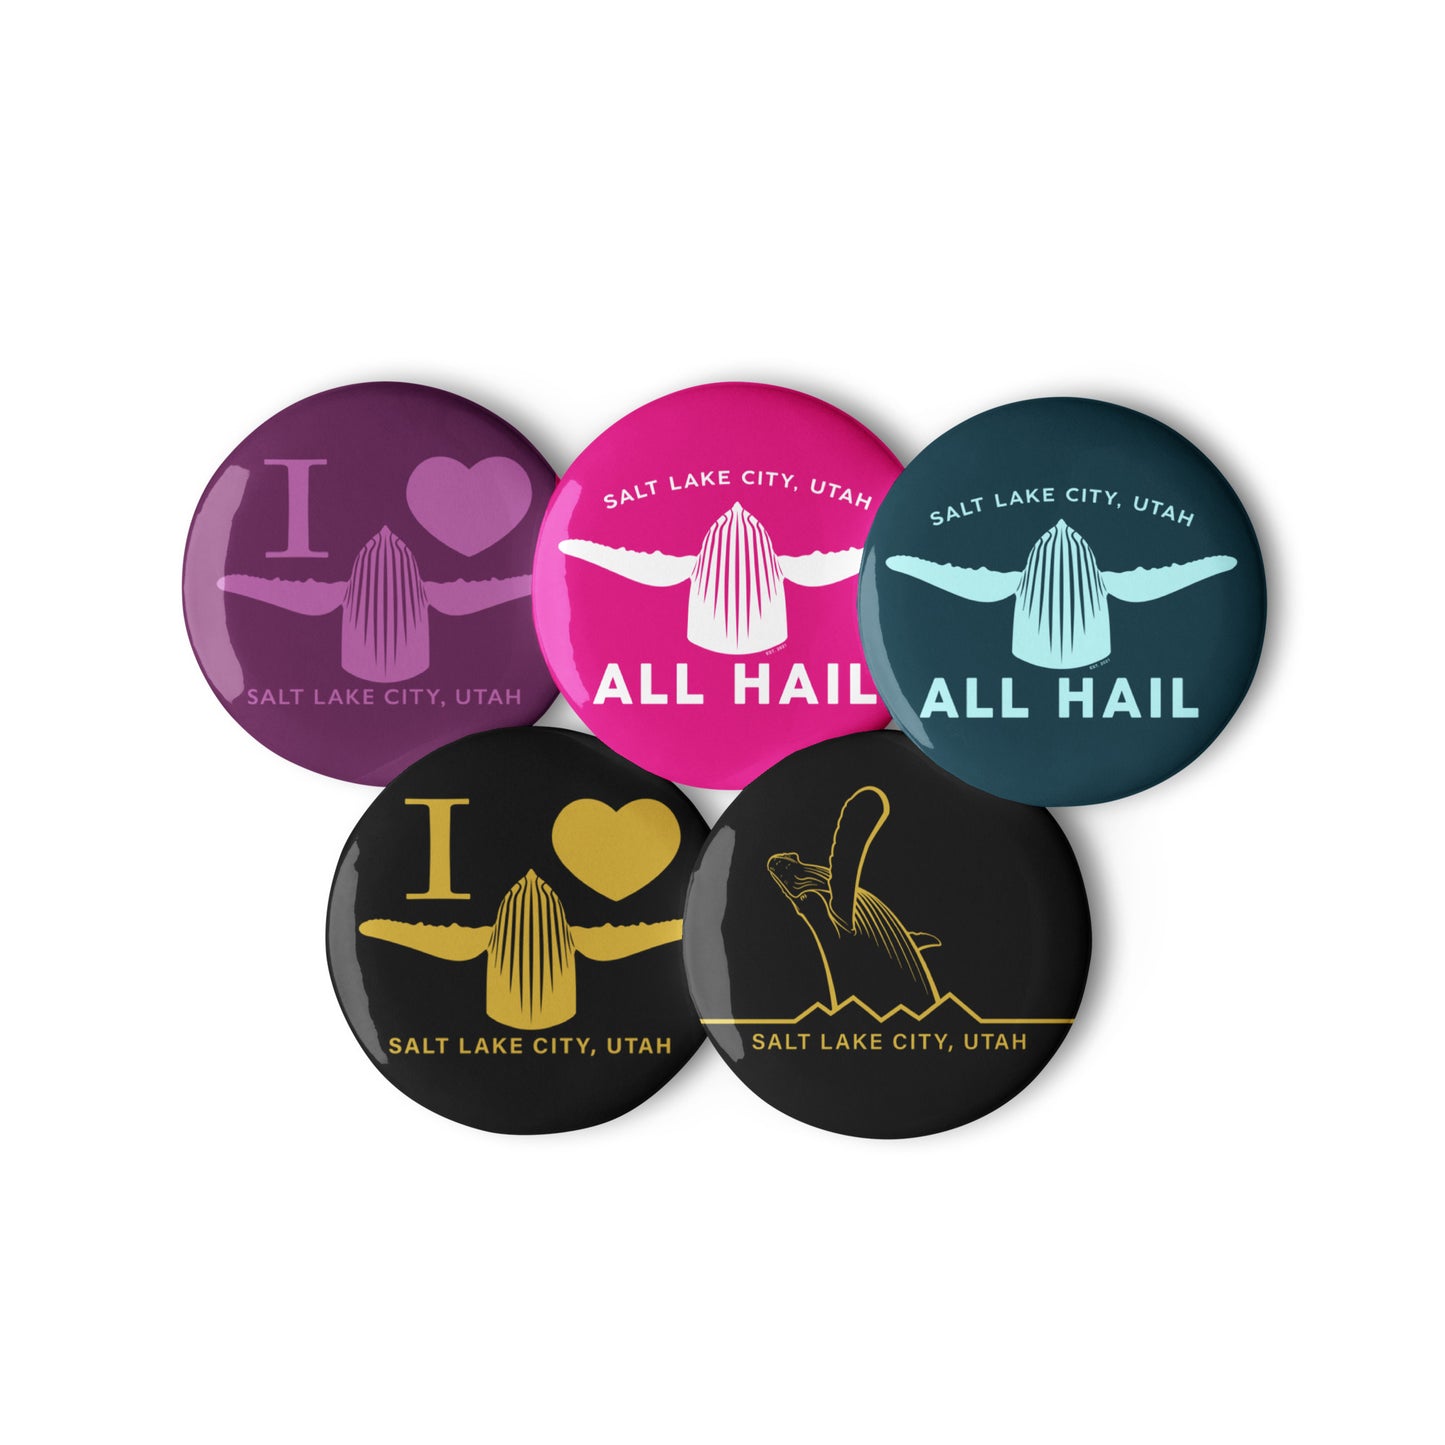 Salt Lake Whale: Set of 5 pin buttons